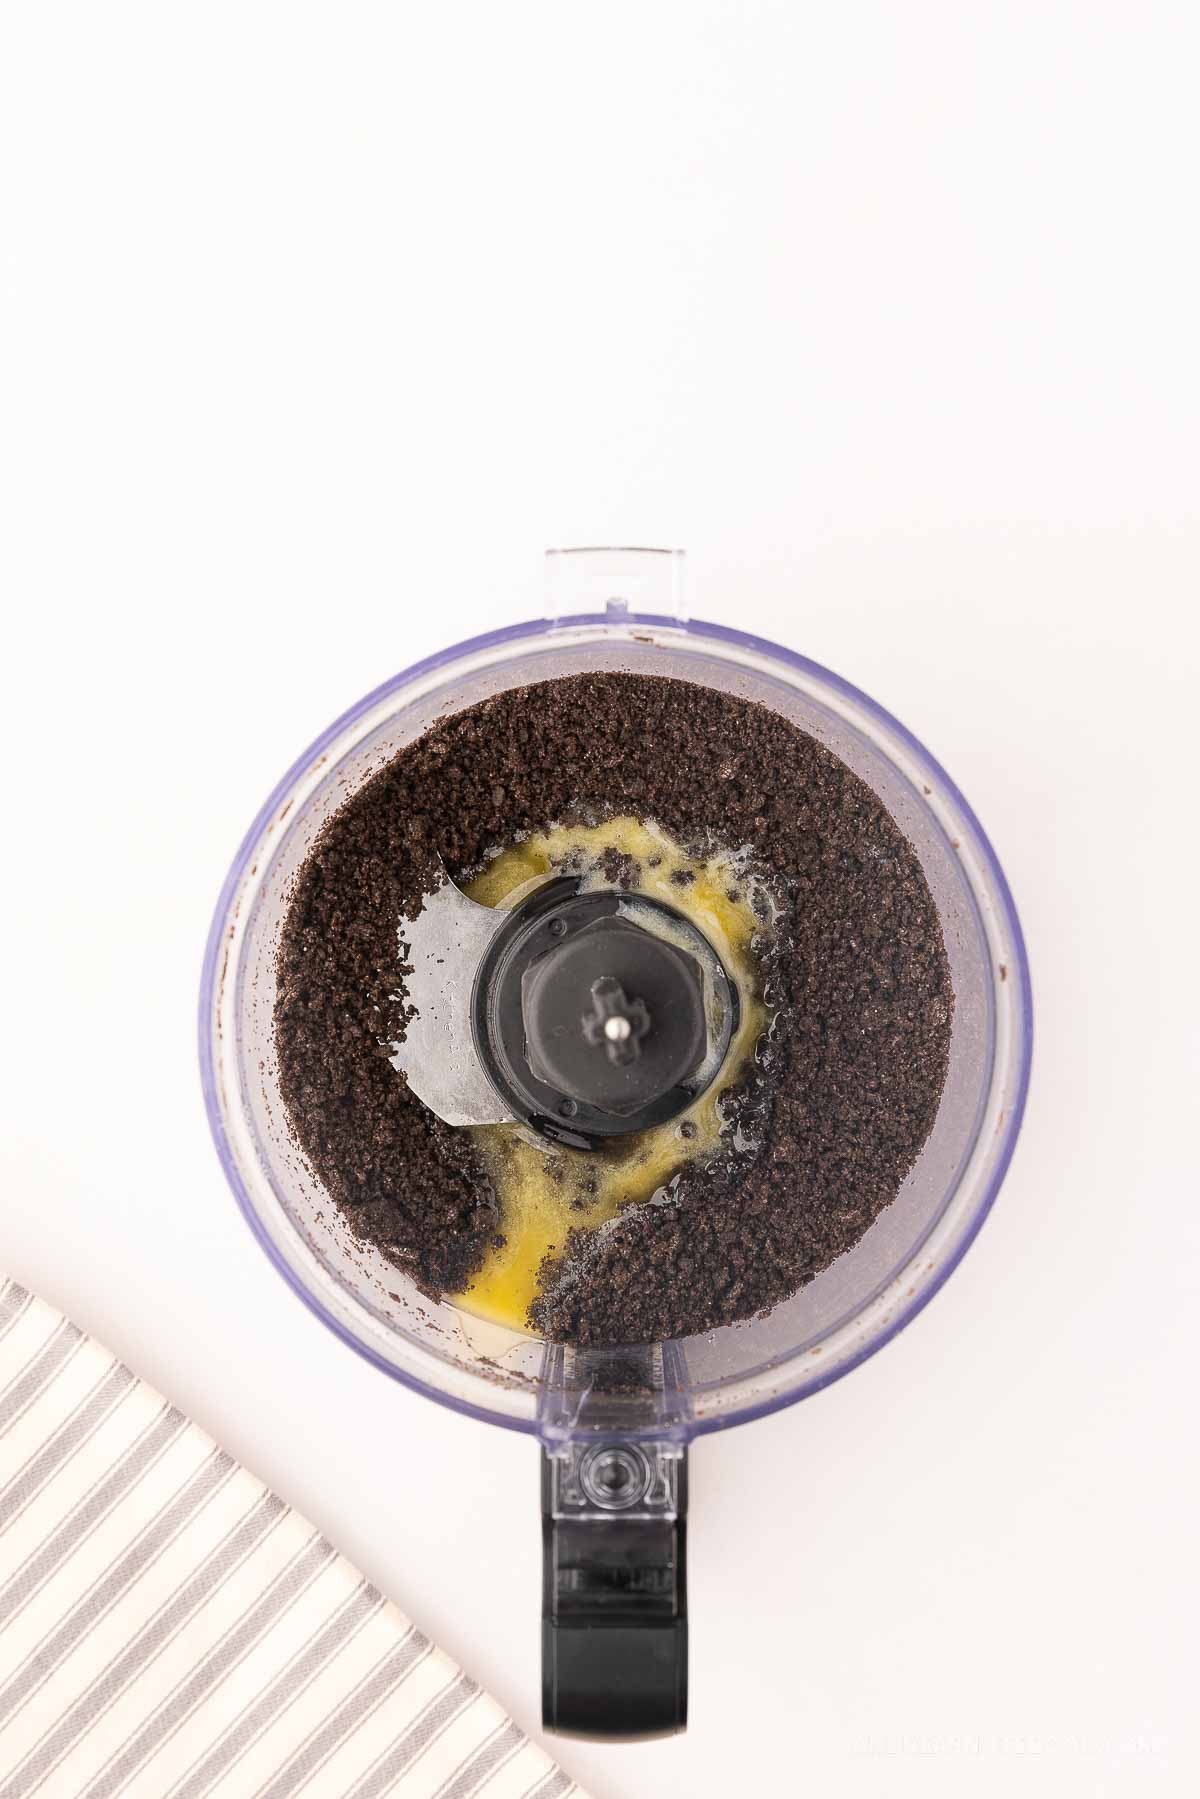 Butter added to Oreo crumbles in a food processor.